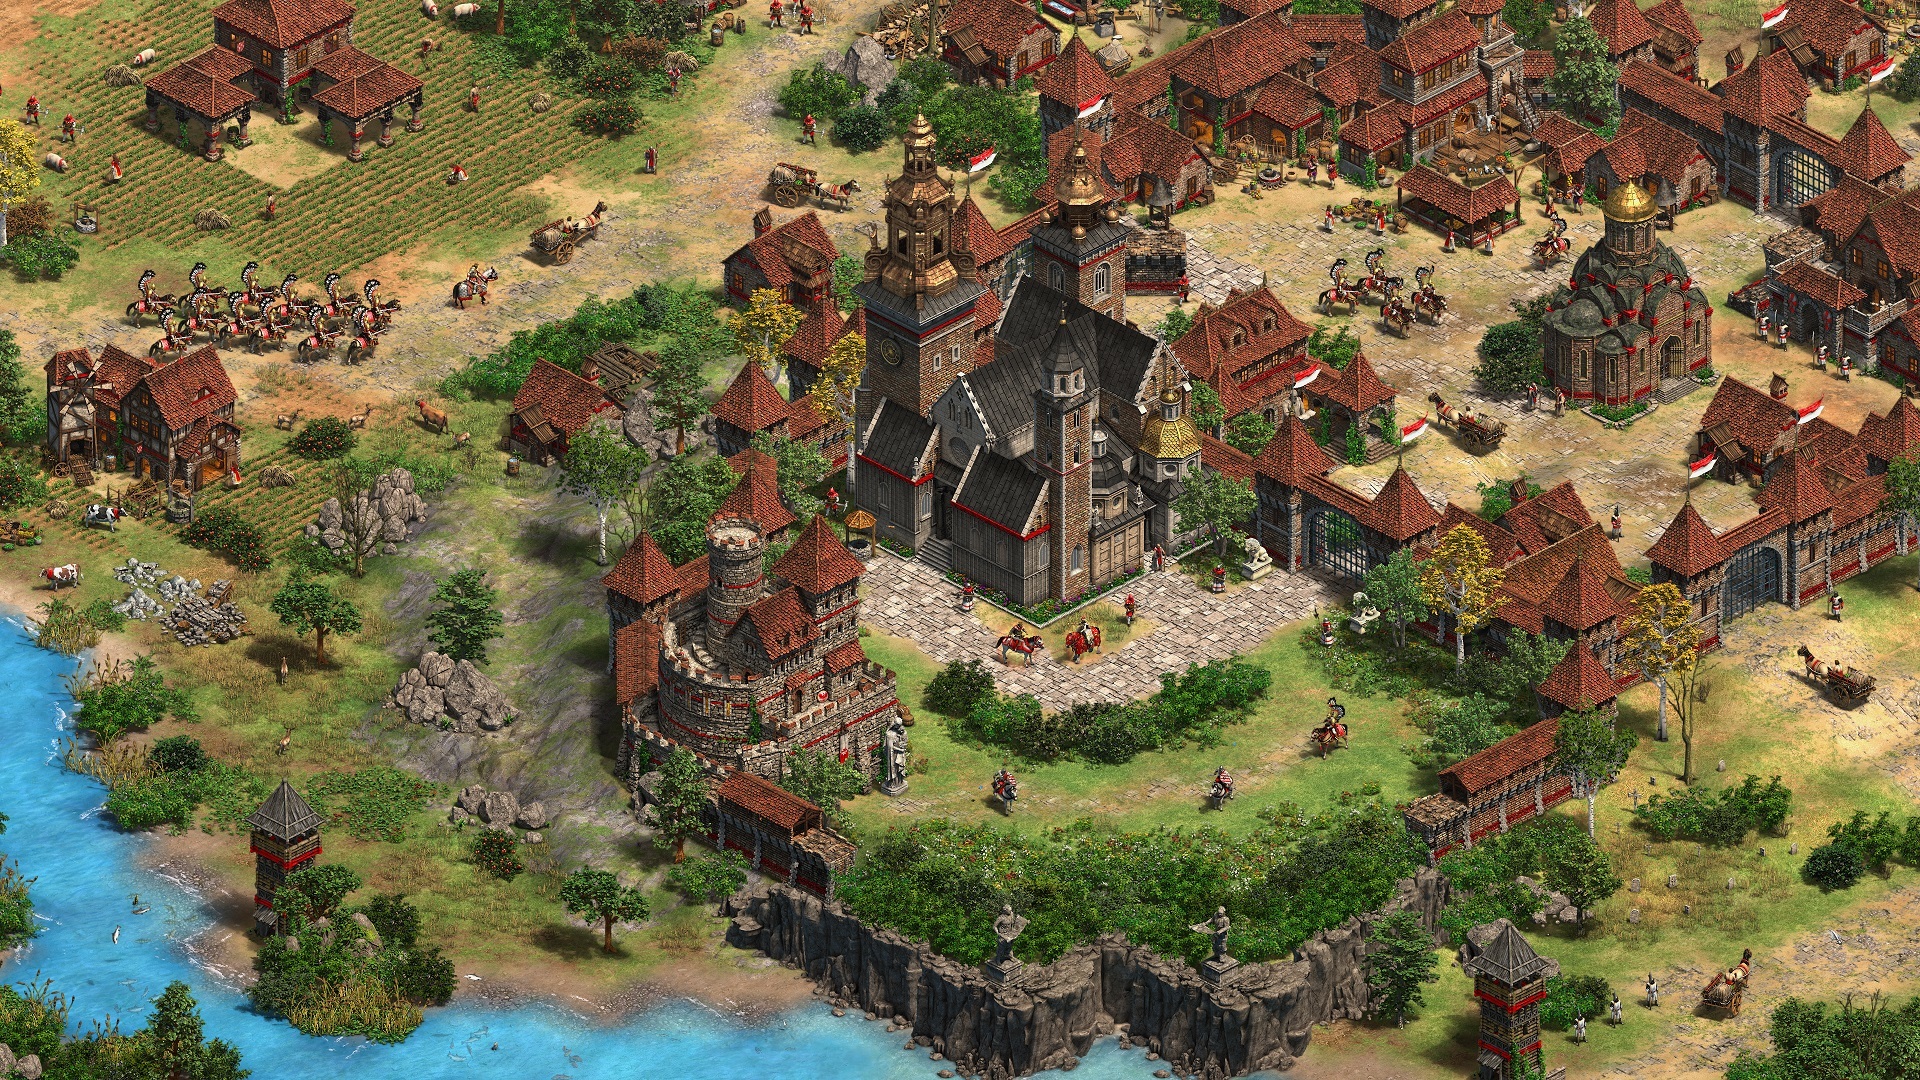 Age of Empires 2: Definitive Edition adds the Poles and Bohemians in a new DLC